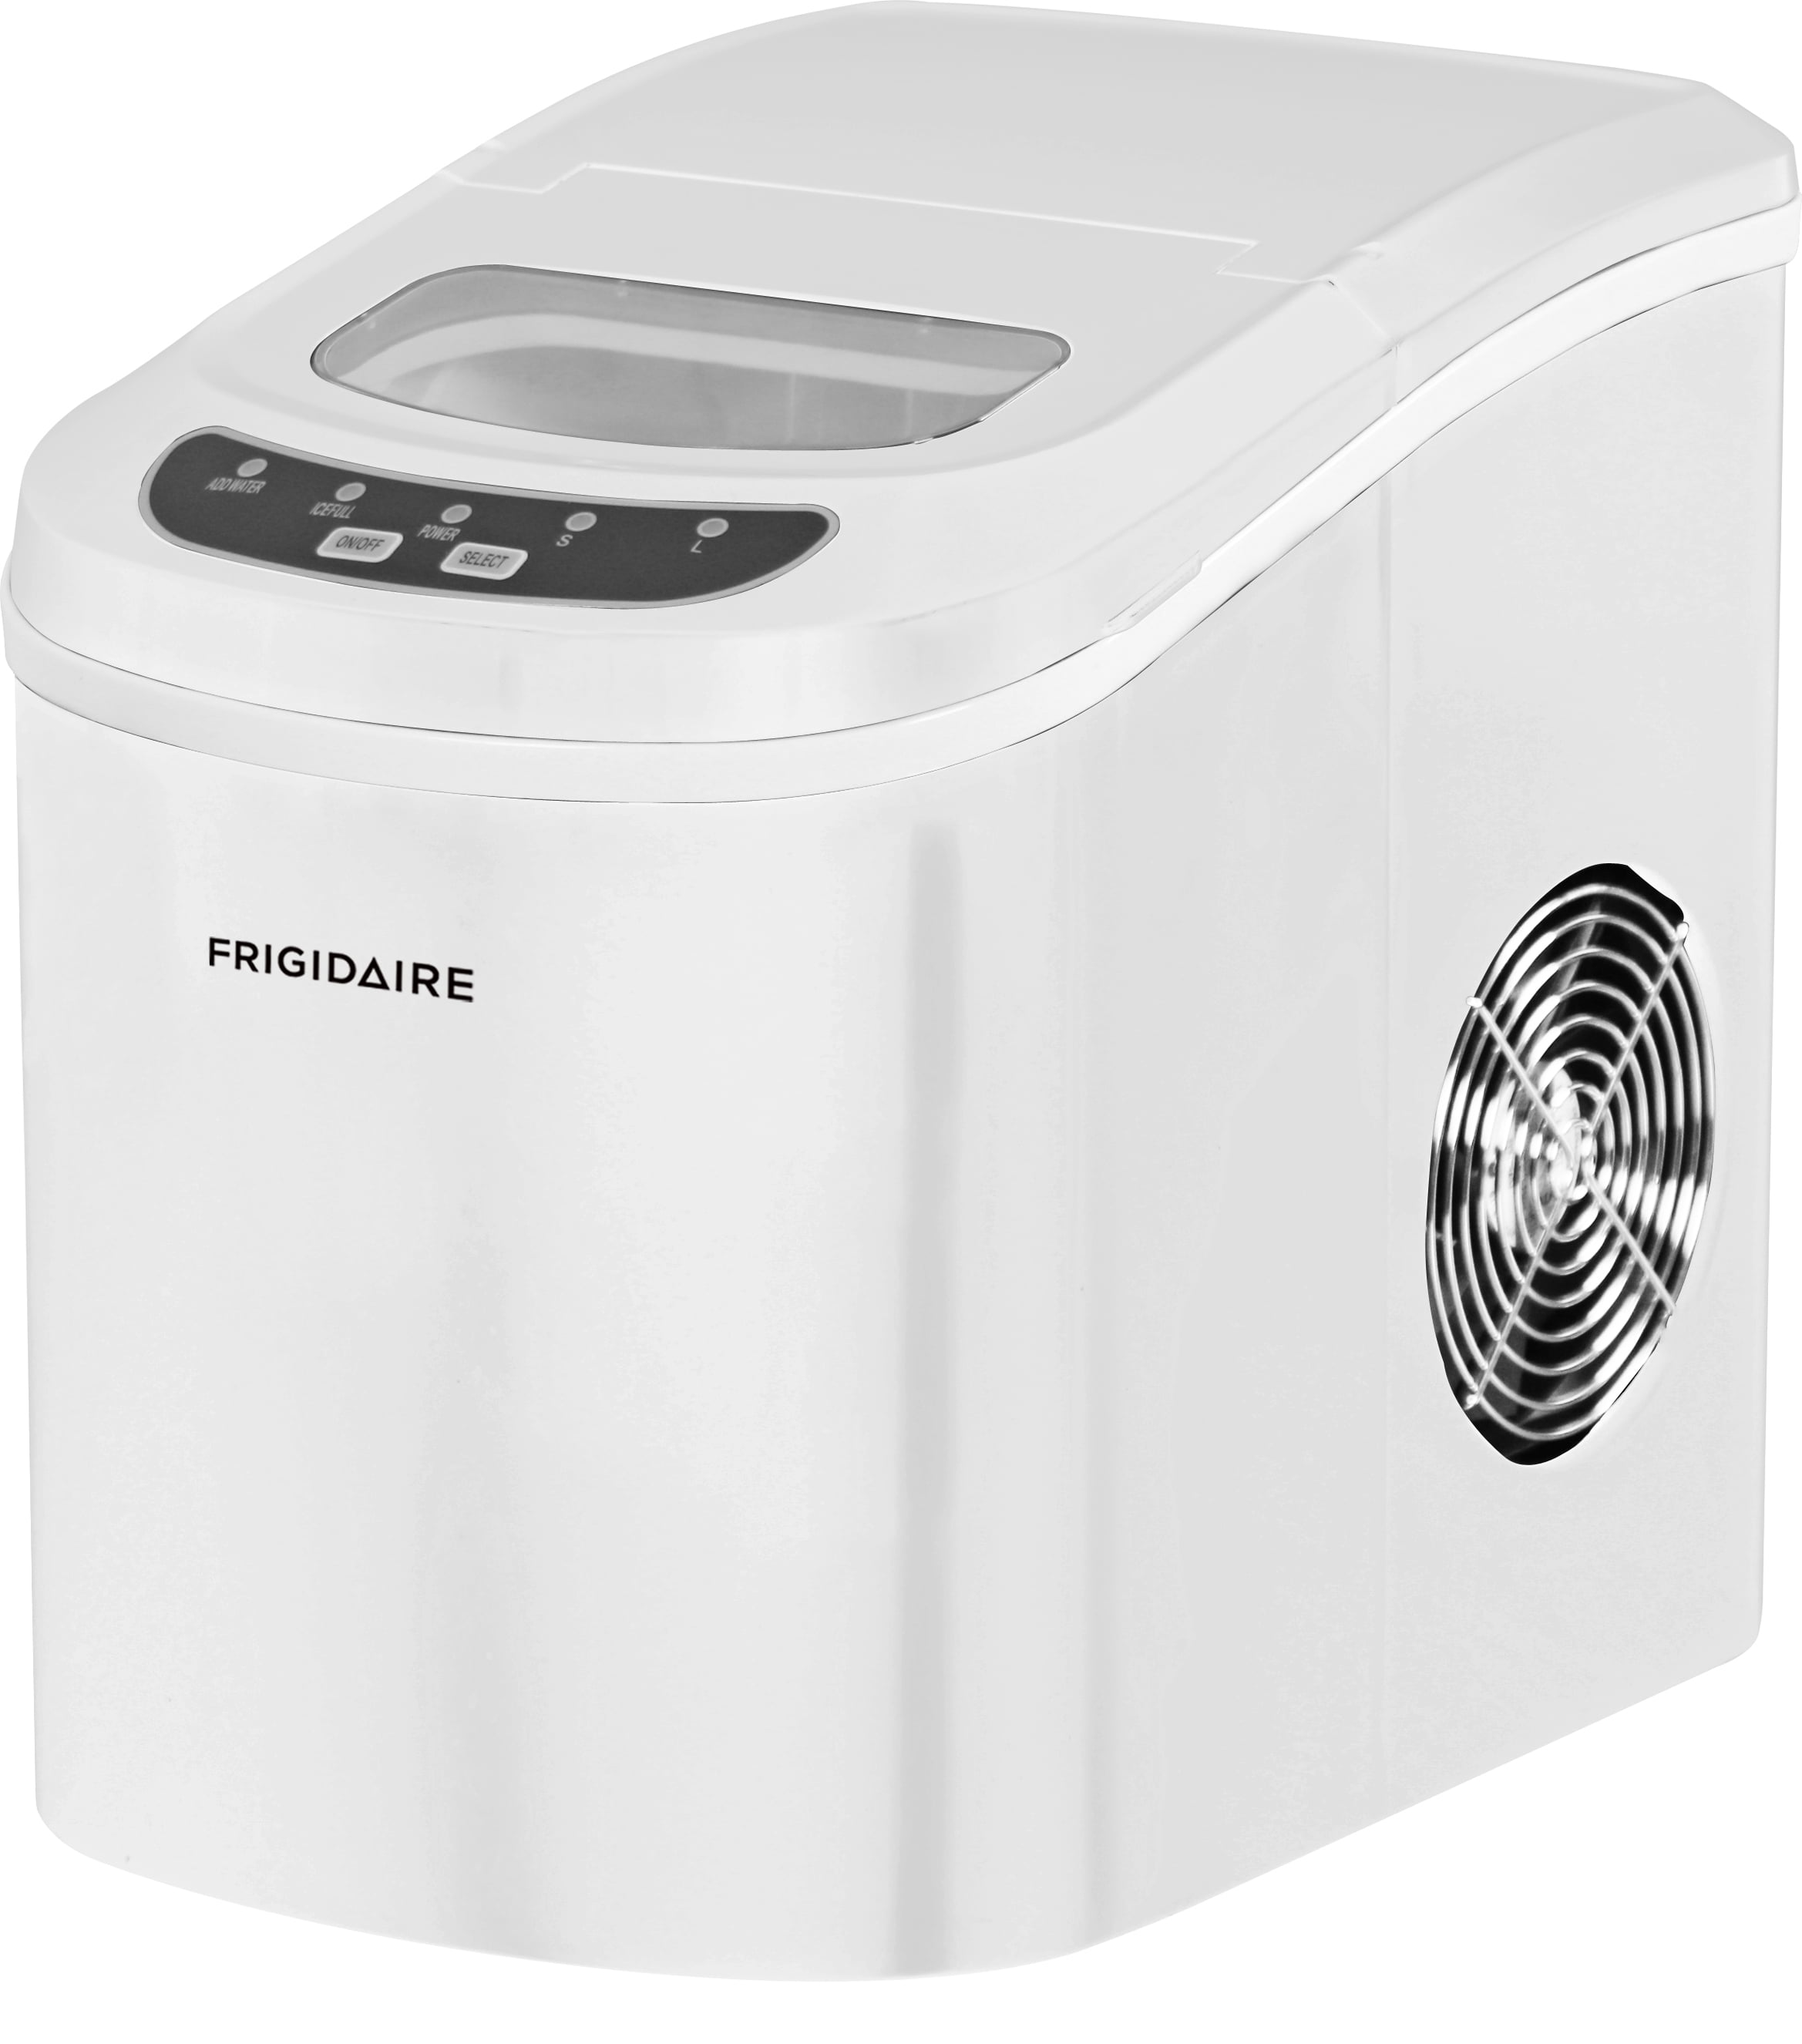 Frigidaire 26 lb. Countertop Ice Maker (EFIC102), White - Walmart.com How To Clean Countertop Frigidaire Ice Maker